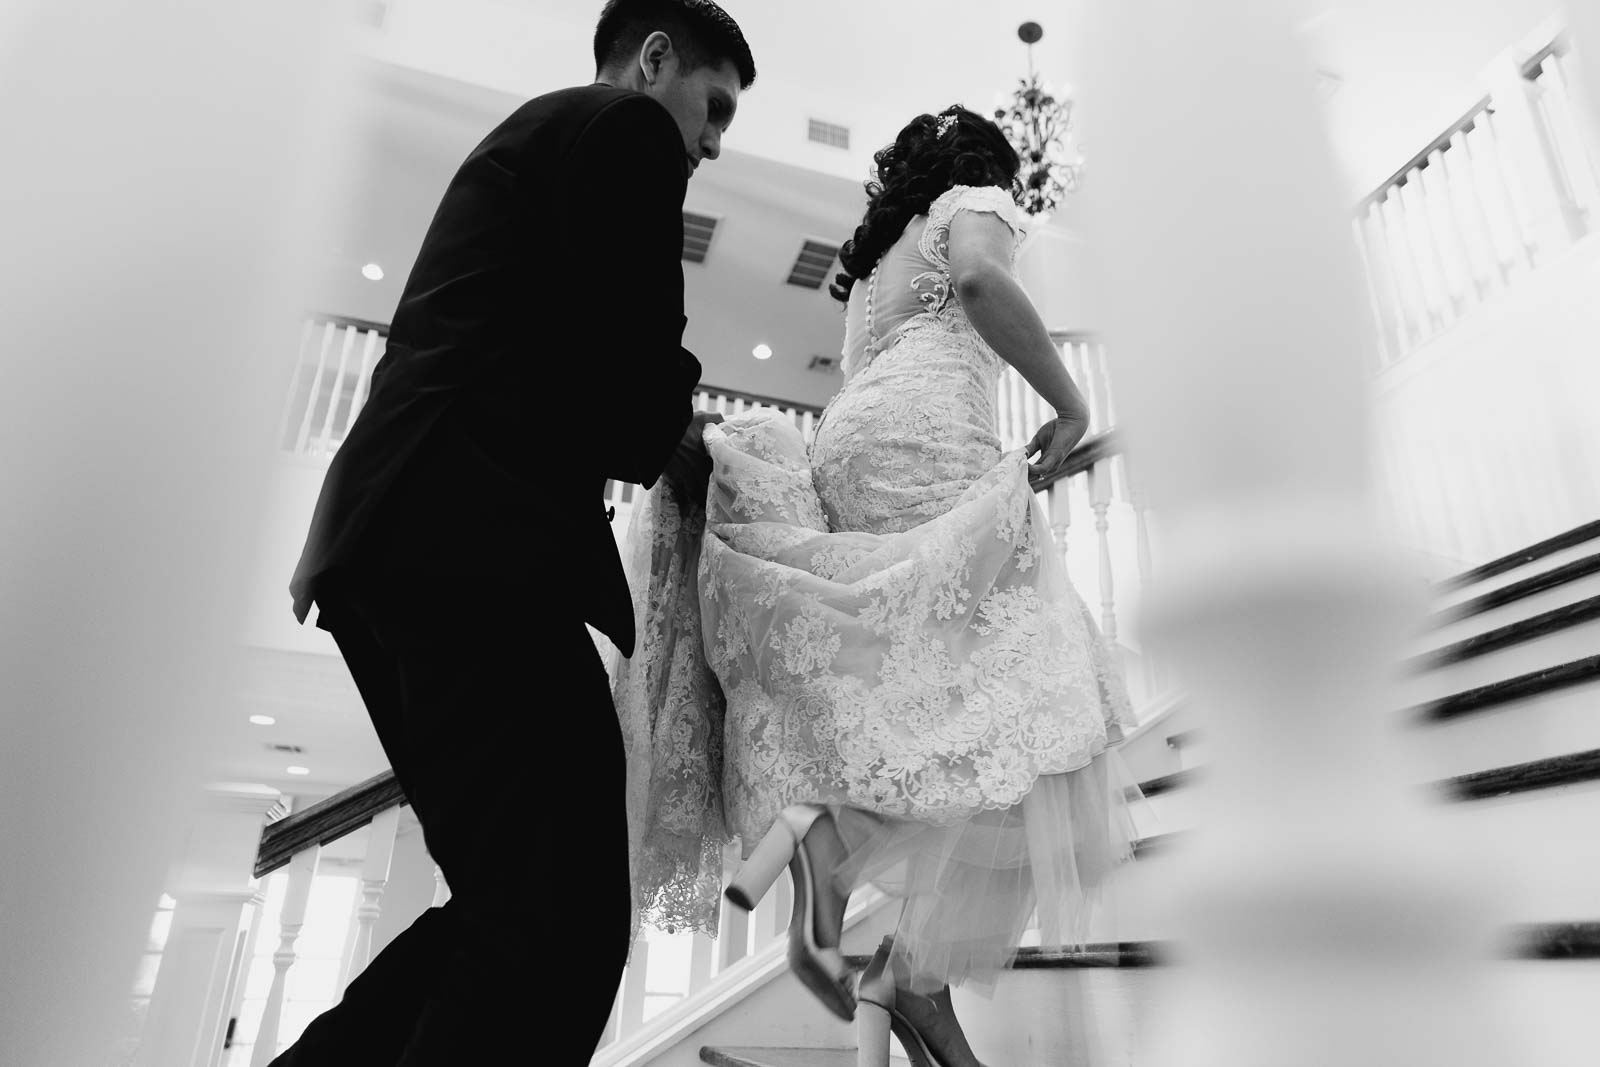 The groom clutches the bride‘s dress as she goes up the staircase at Kendall point low angle